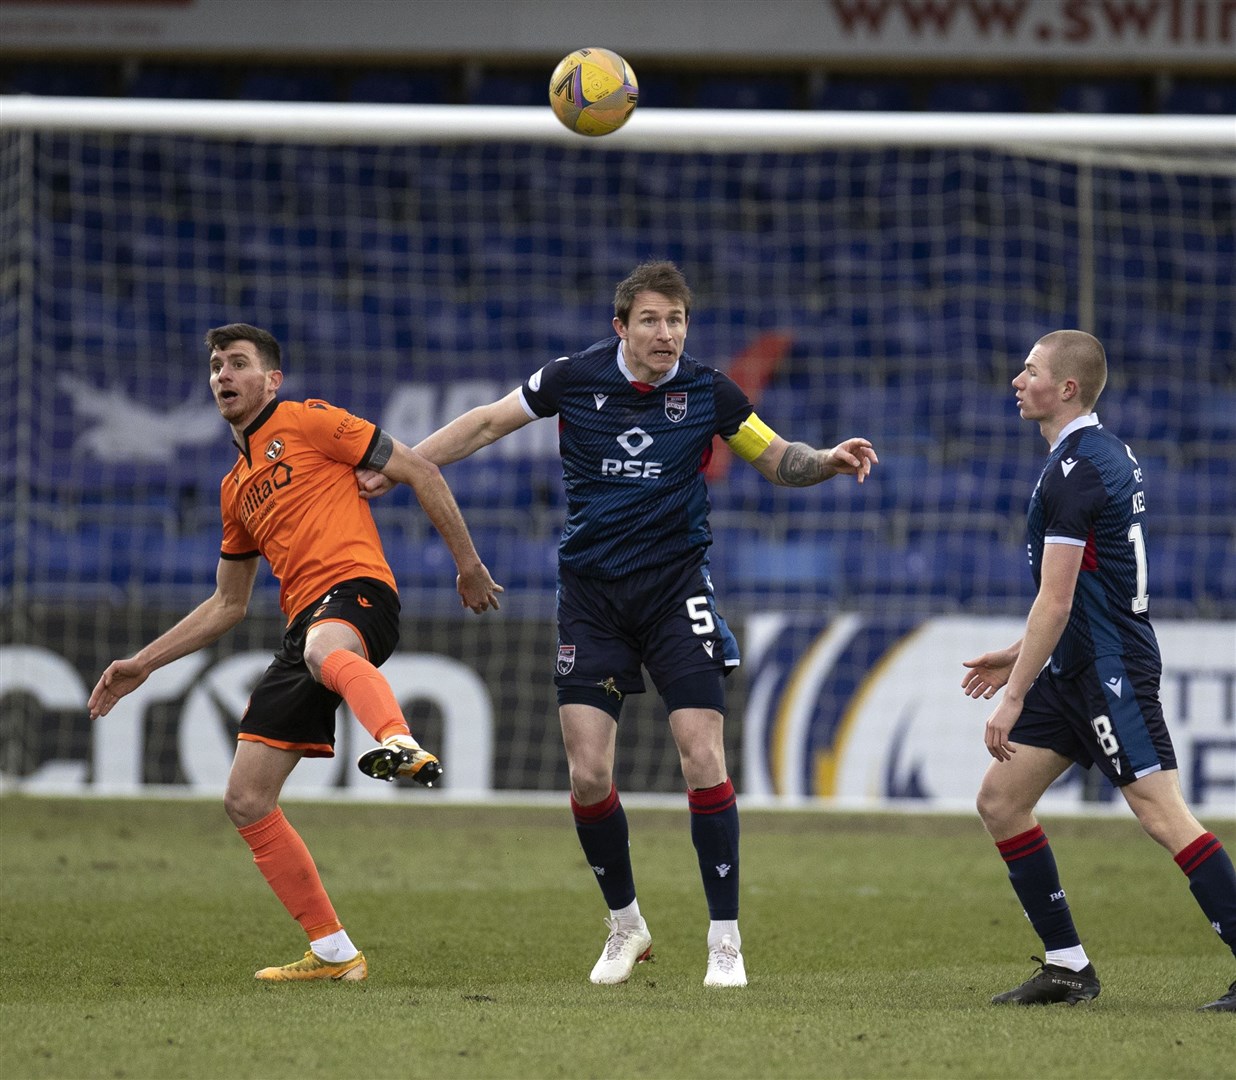 Picture - Ken Macpherson, Inverness. Ross County(0) v Dundee Utd(2). 06/02/21. Ross County's Callum Morris heads clear from Dundee Utd's Adrian Sporle.